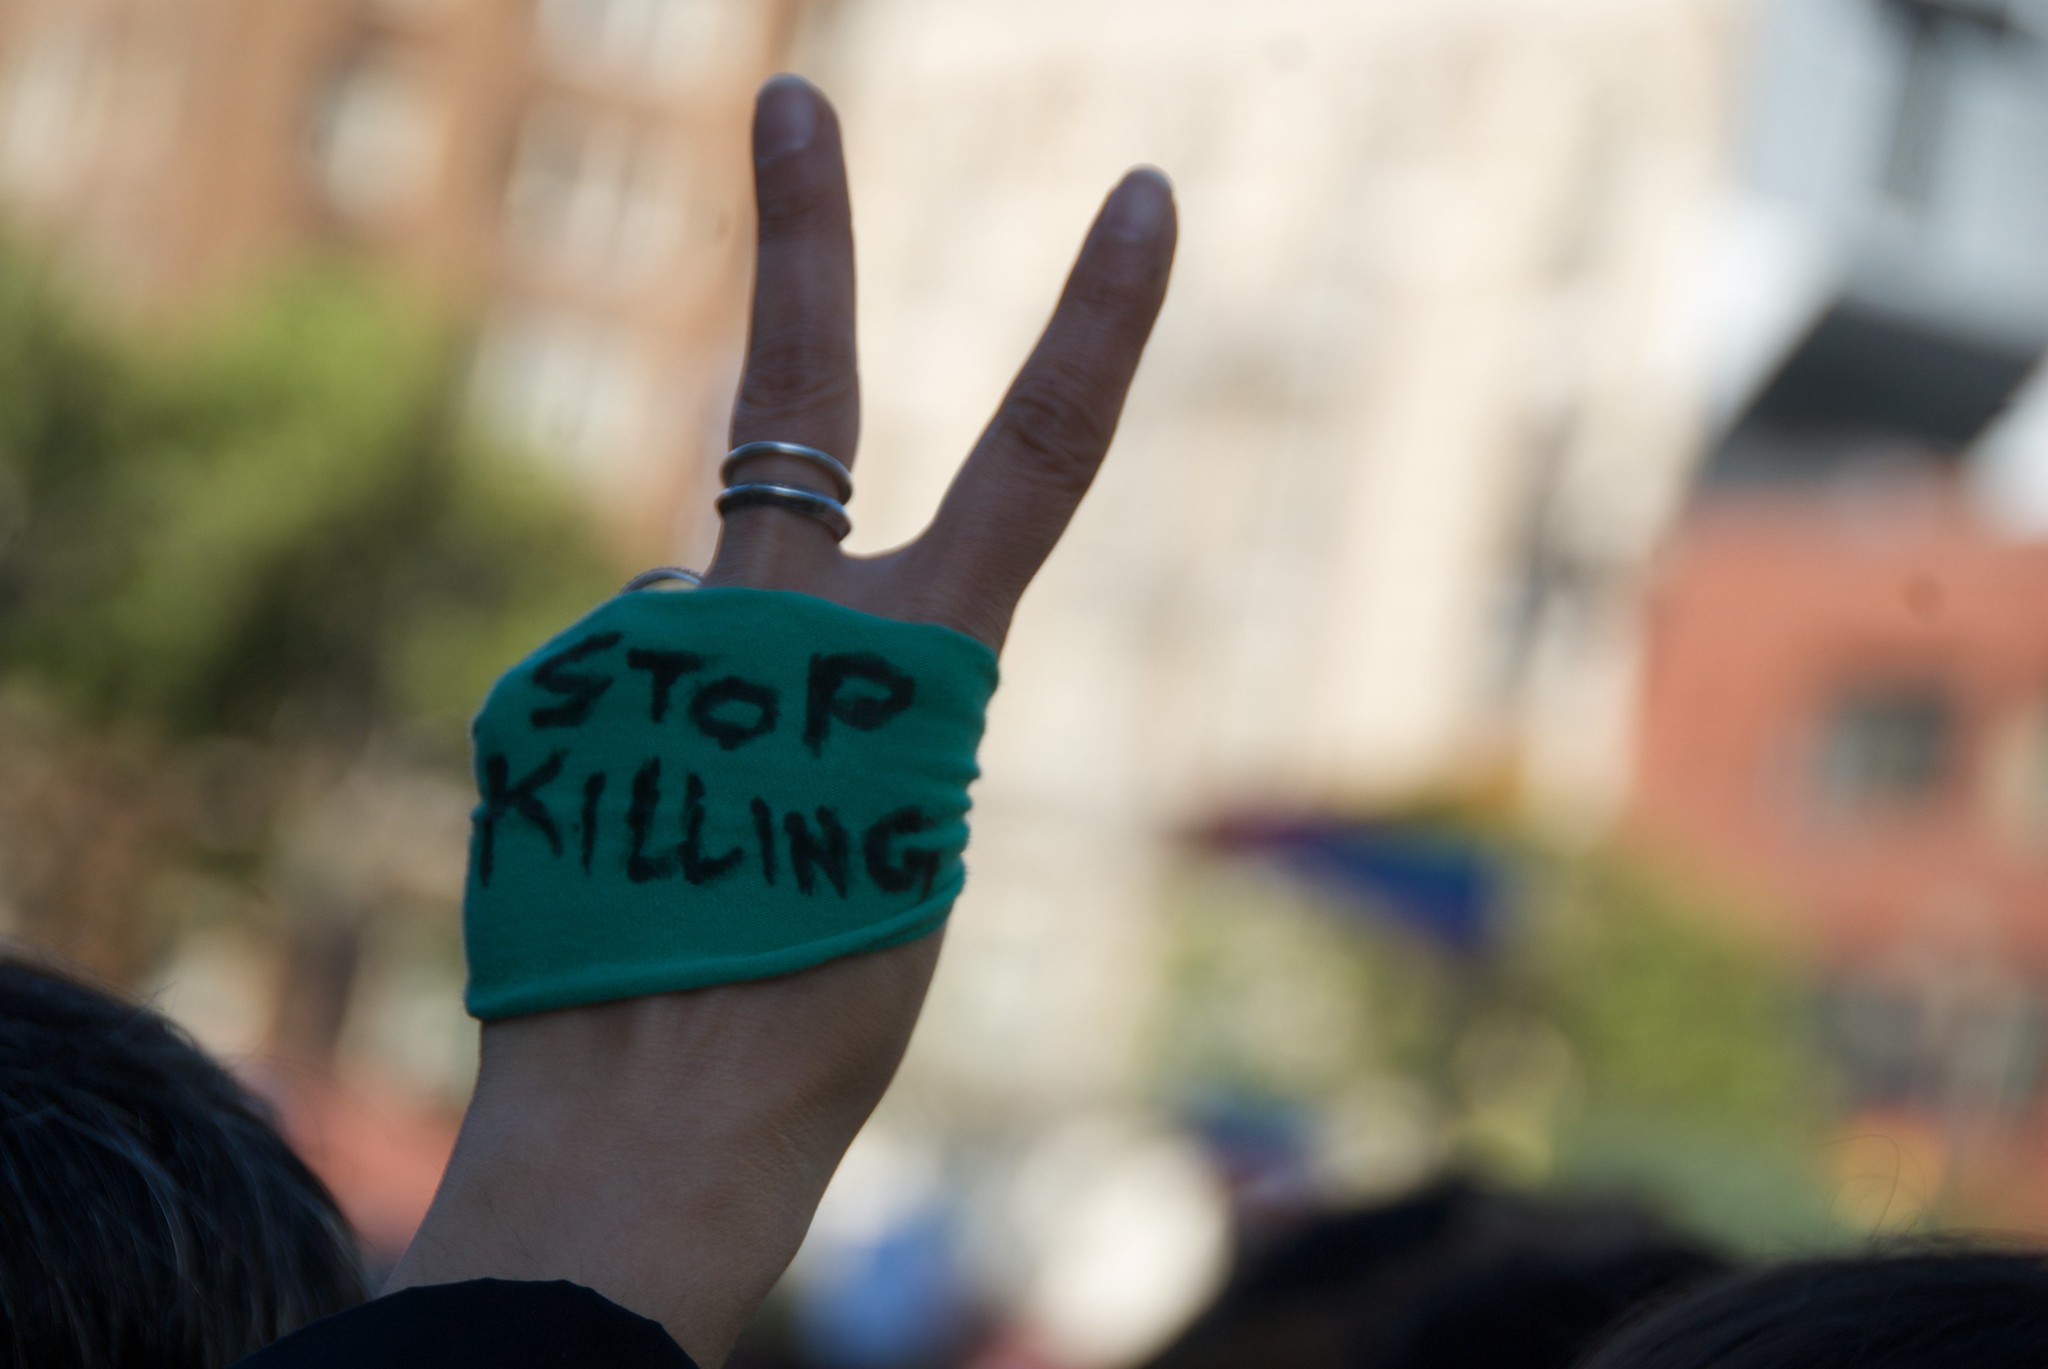 Green bandage that says “Stop Killing” wrapped around hand holding up a Peace sign.